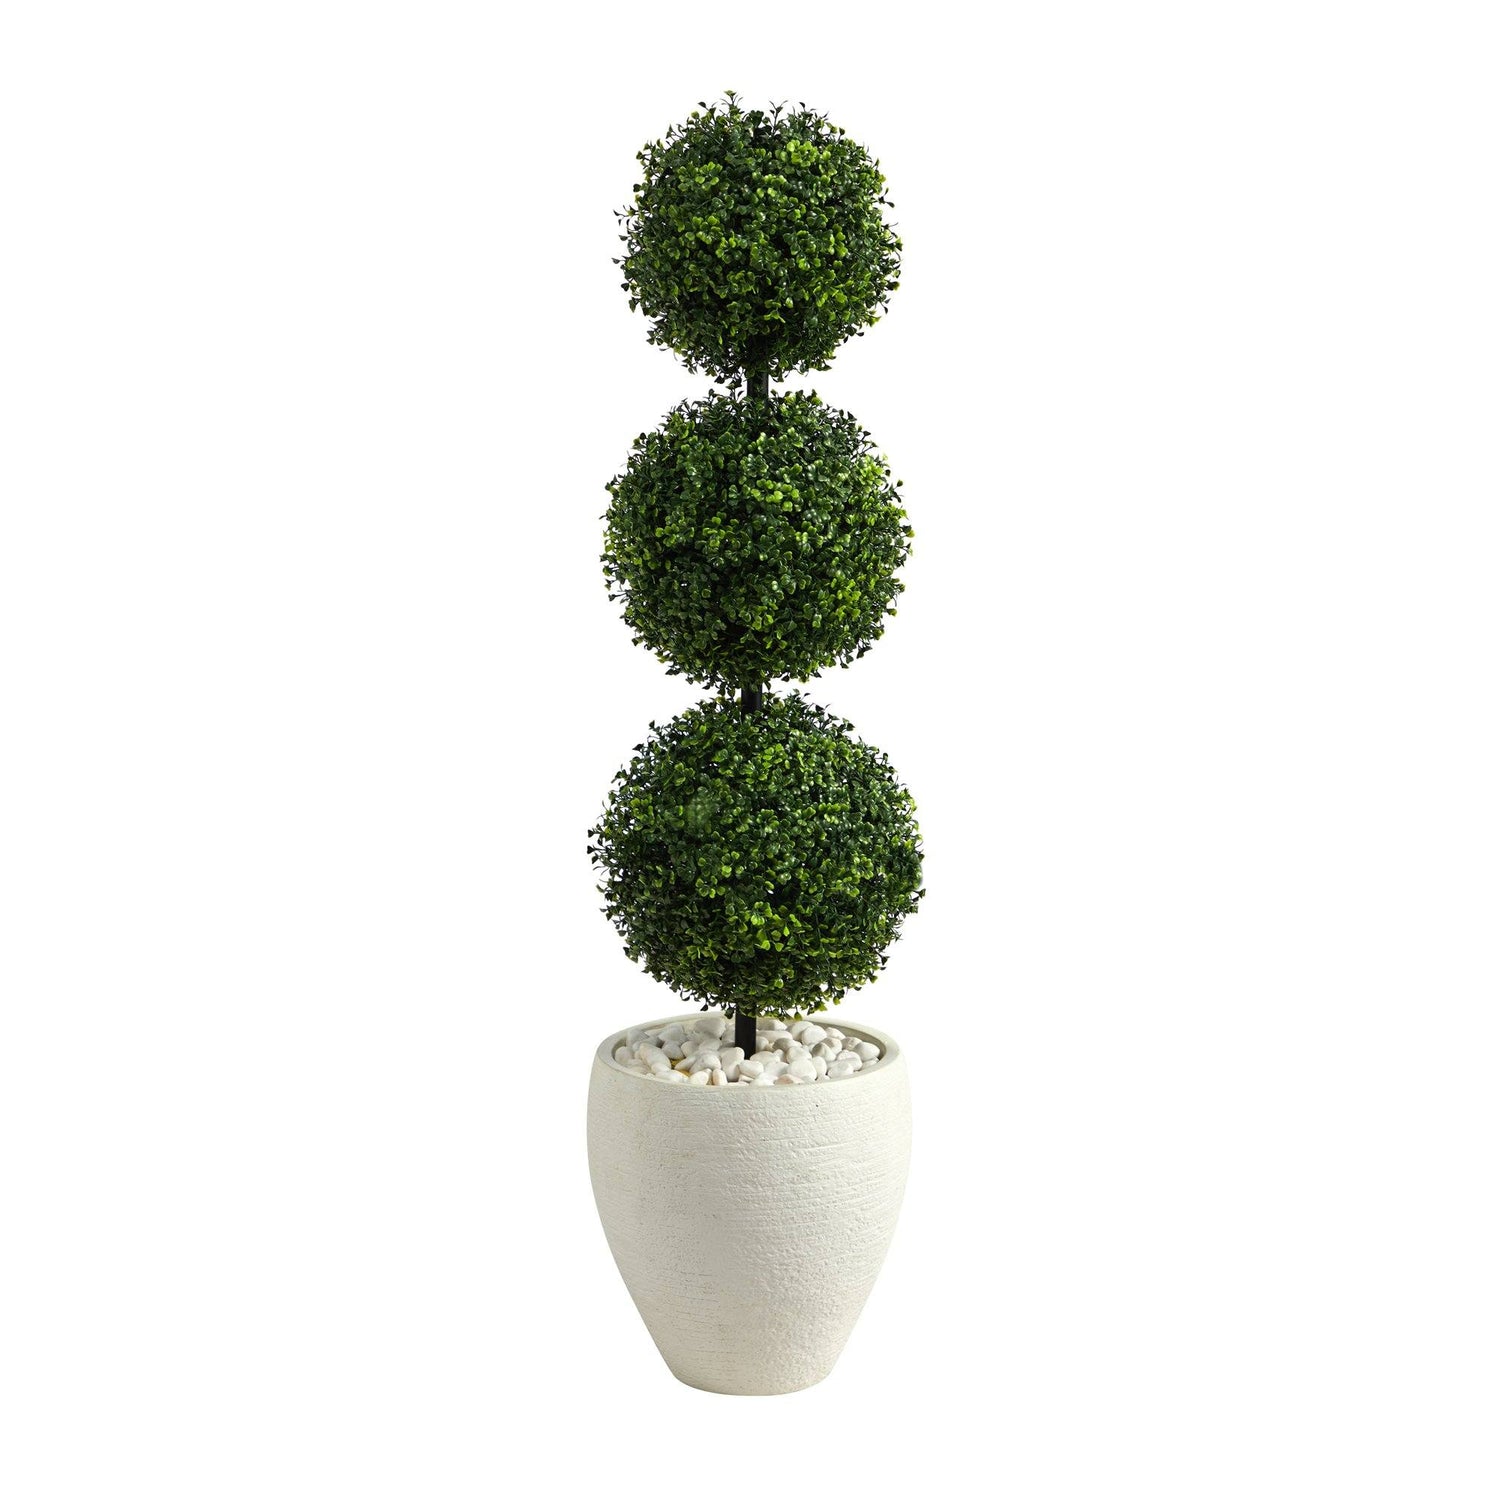 3.5’ Boxwood Triple Ball Topiary Artificial Tree in White Planter (Indoor/Outdoor)